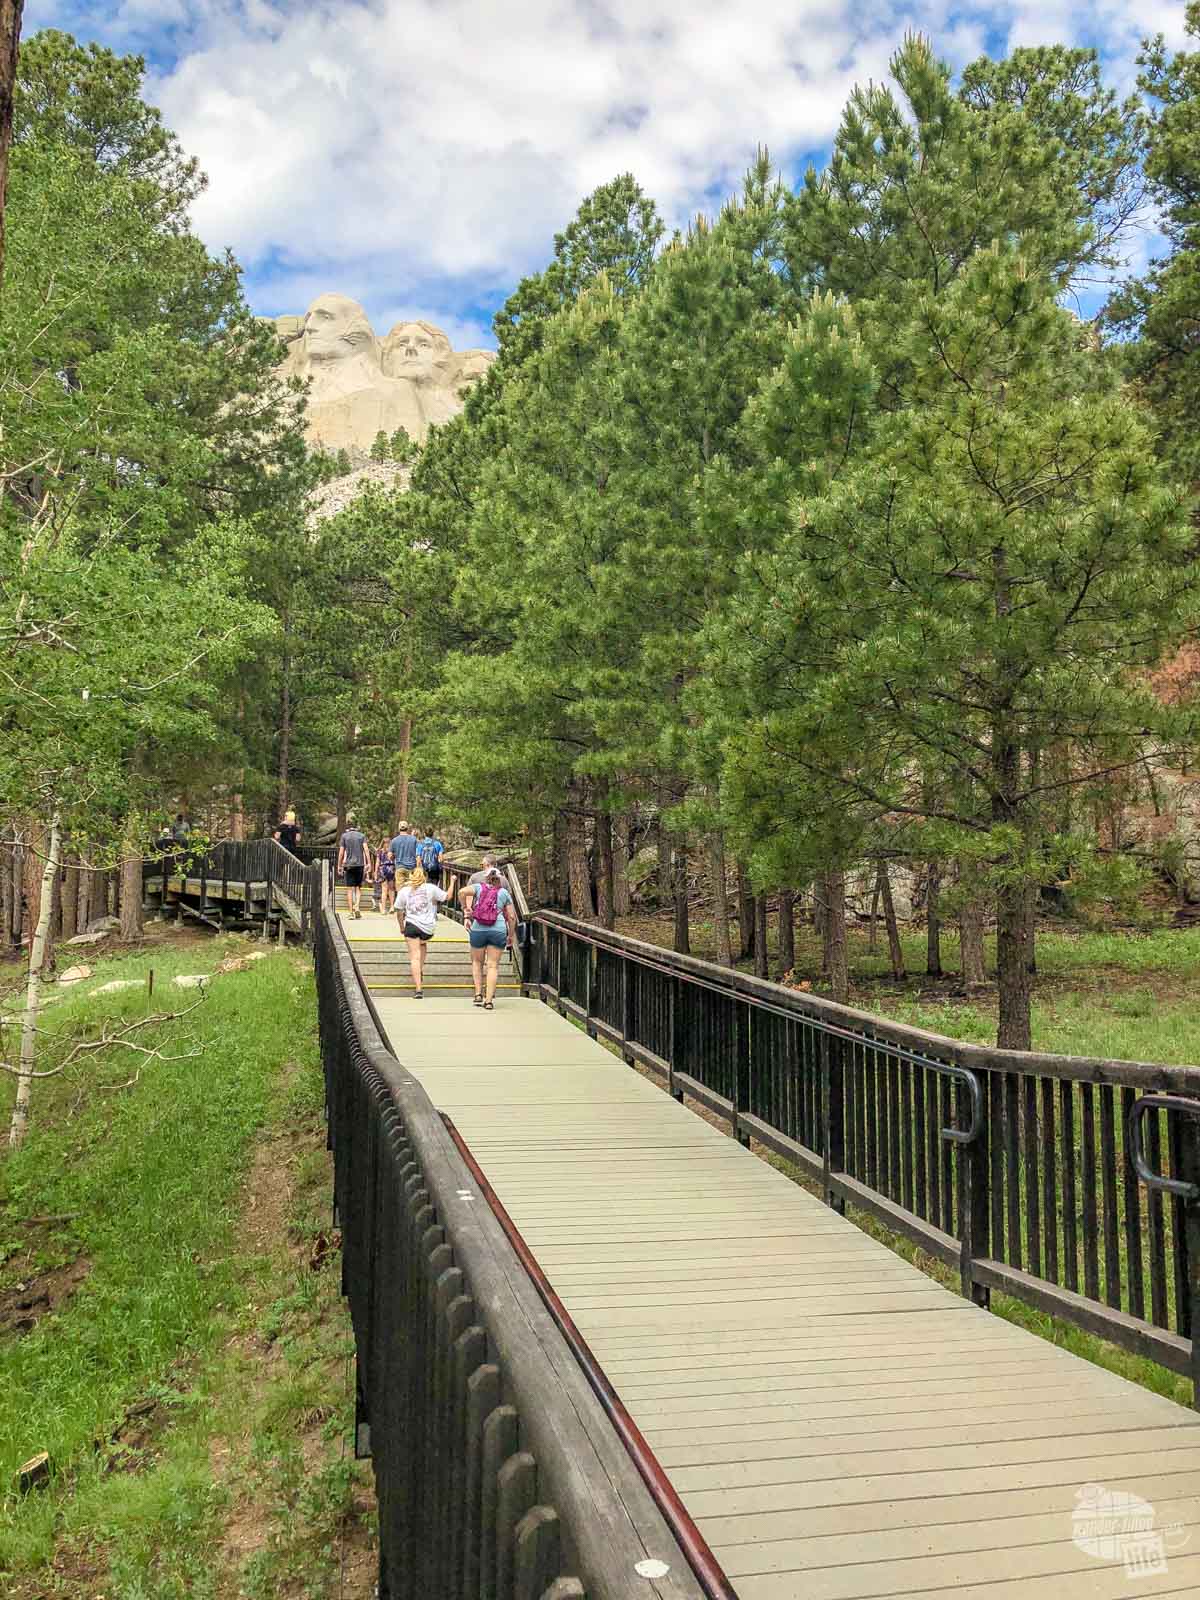 Walking the Presidential Trail is one of our favorite things to do at Mount Rushmore.